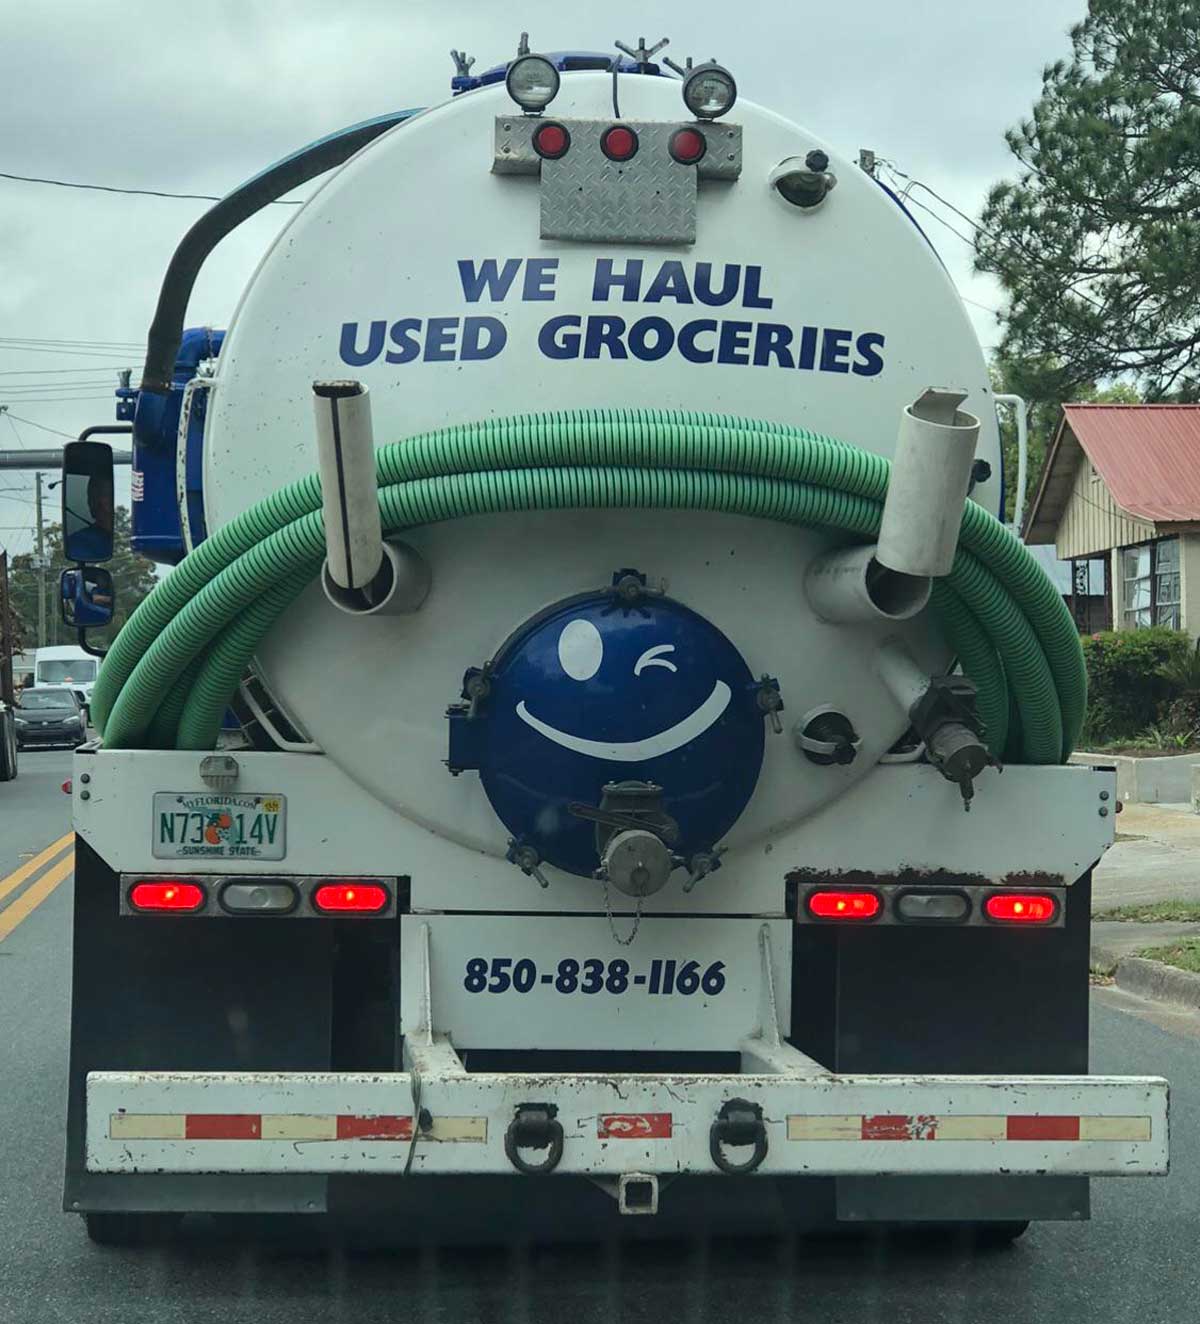 This truck